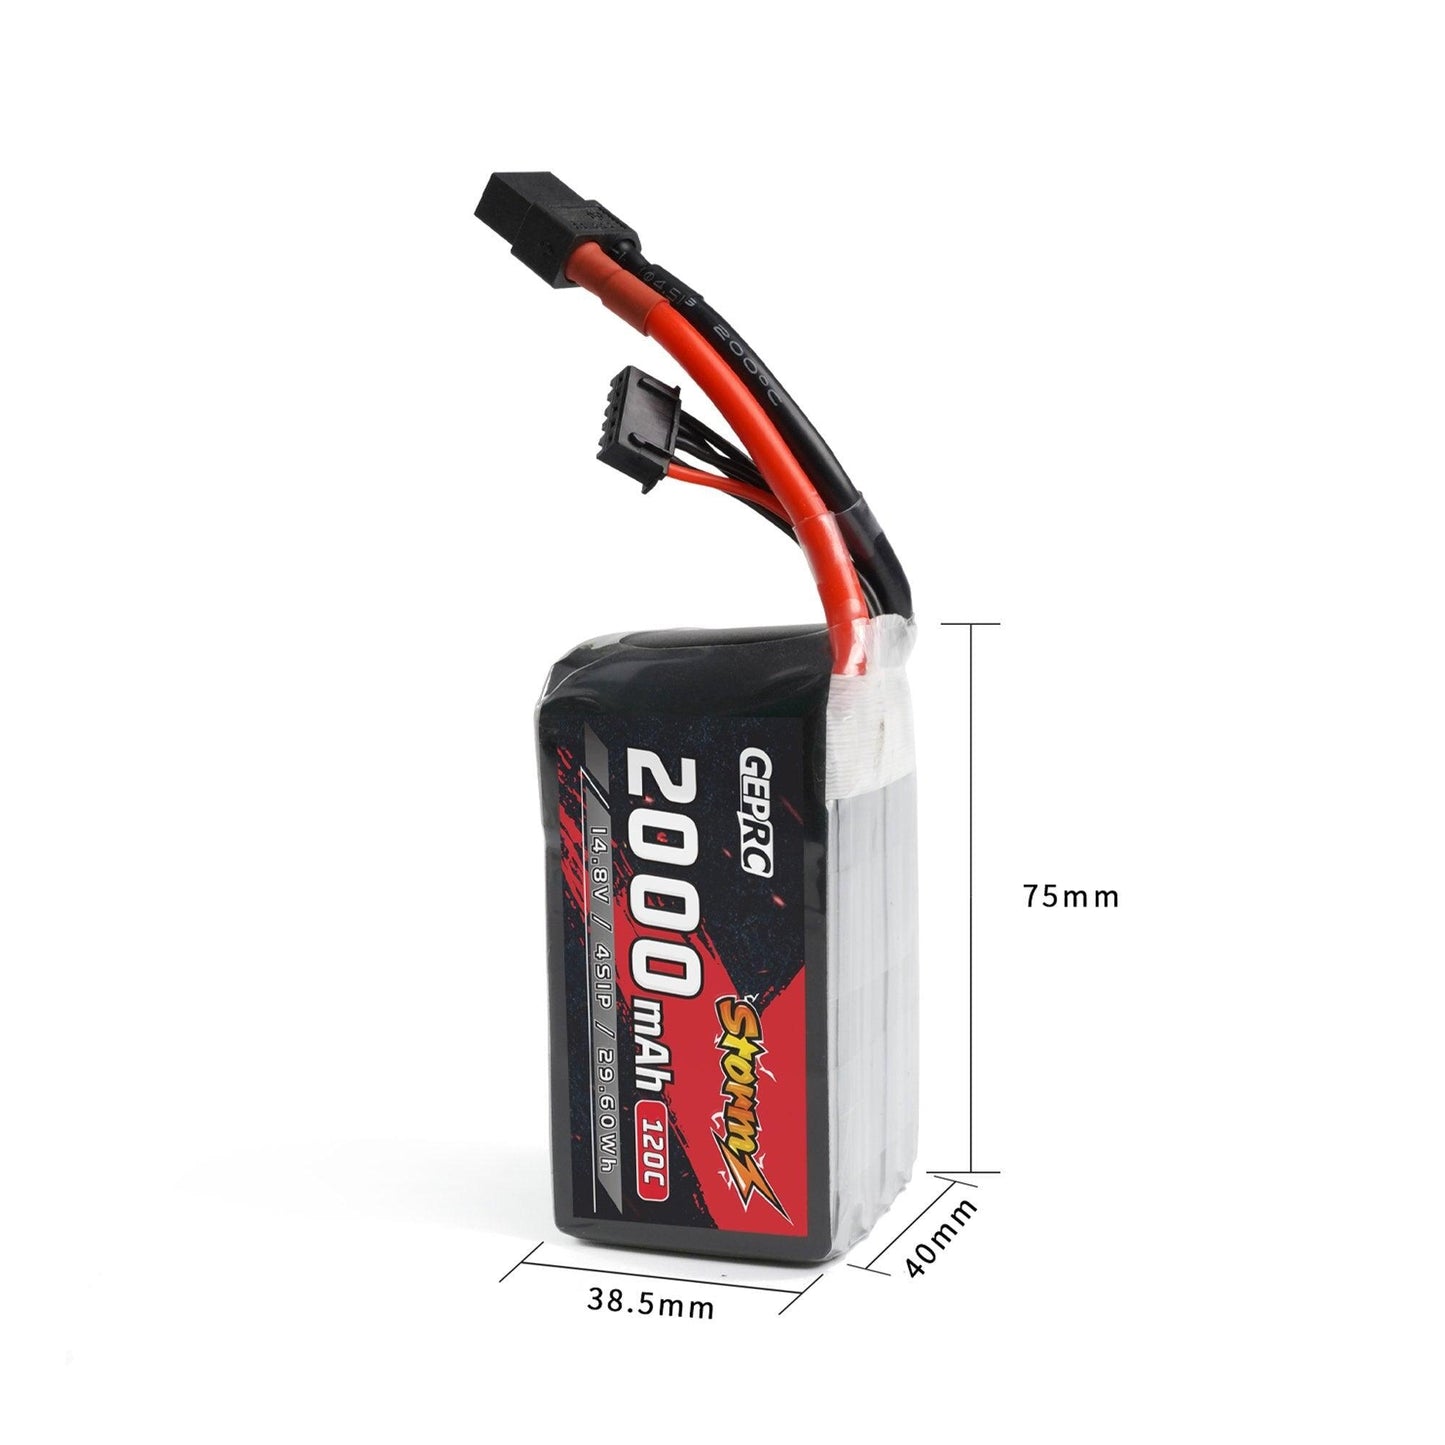 GEPRC Storm 4S 2000mAh 120C Lipo Battery - Suitable For 3-5Inch Series Drone For RC FPV Quadcopter Freestyle Series FPV Drone Battery - RCDrone